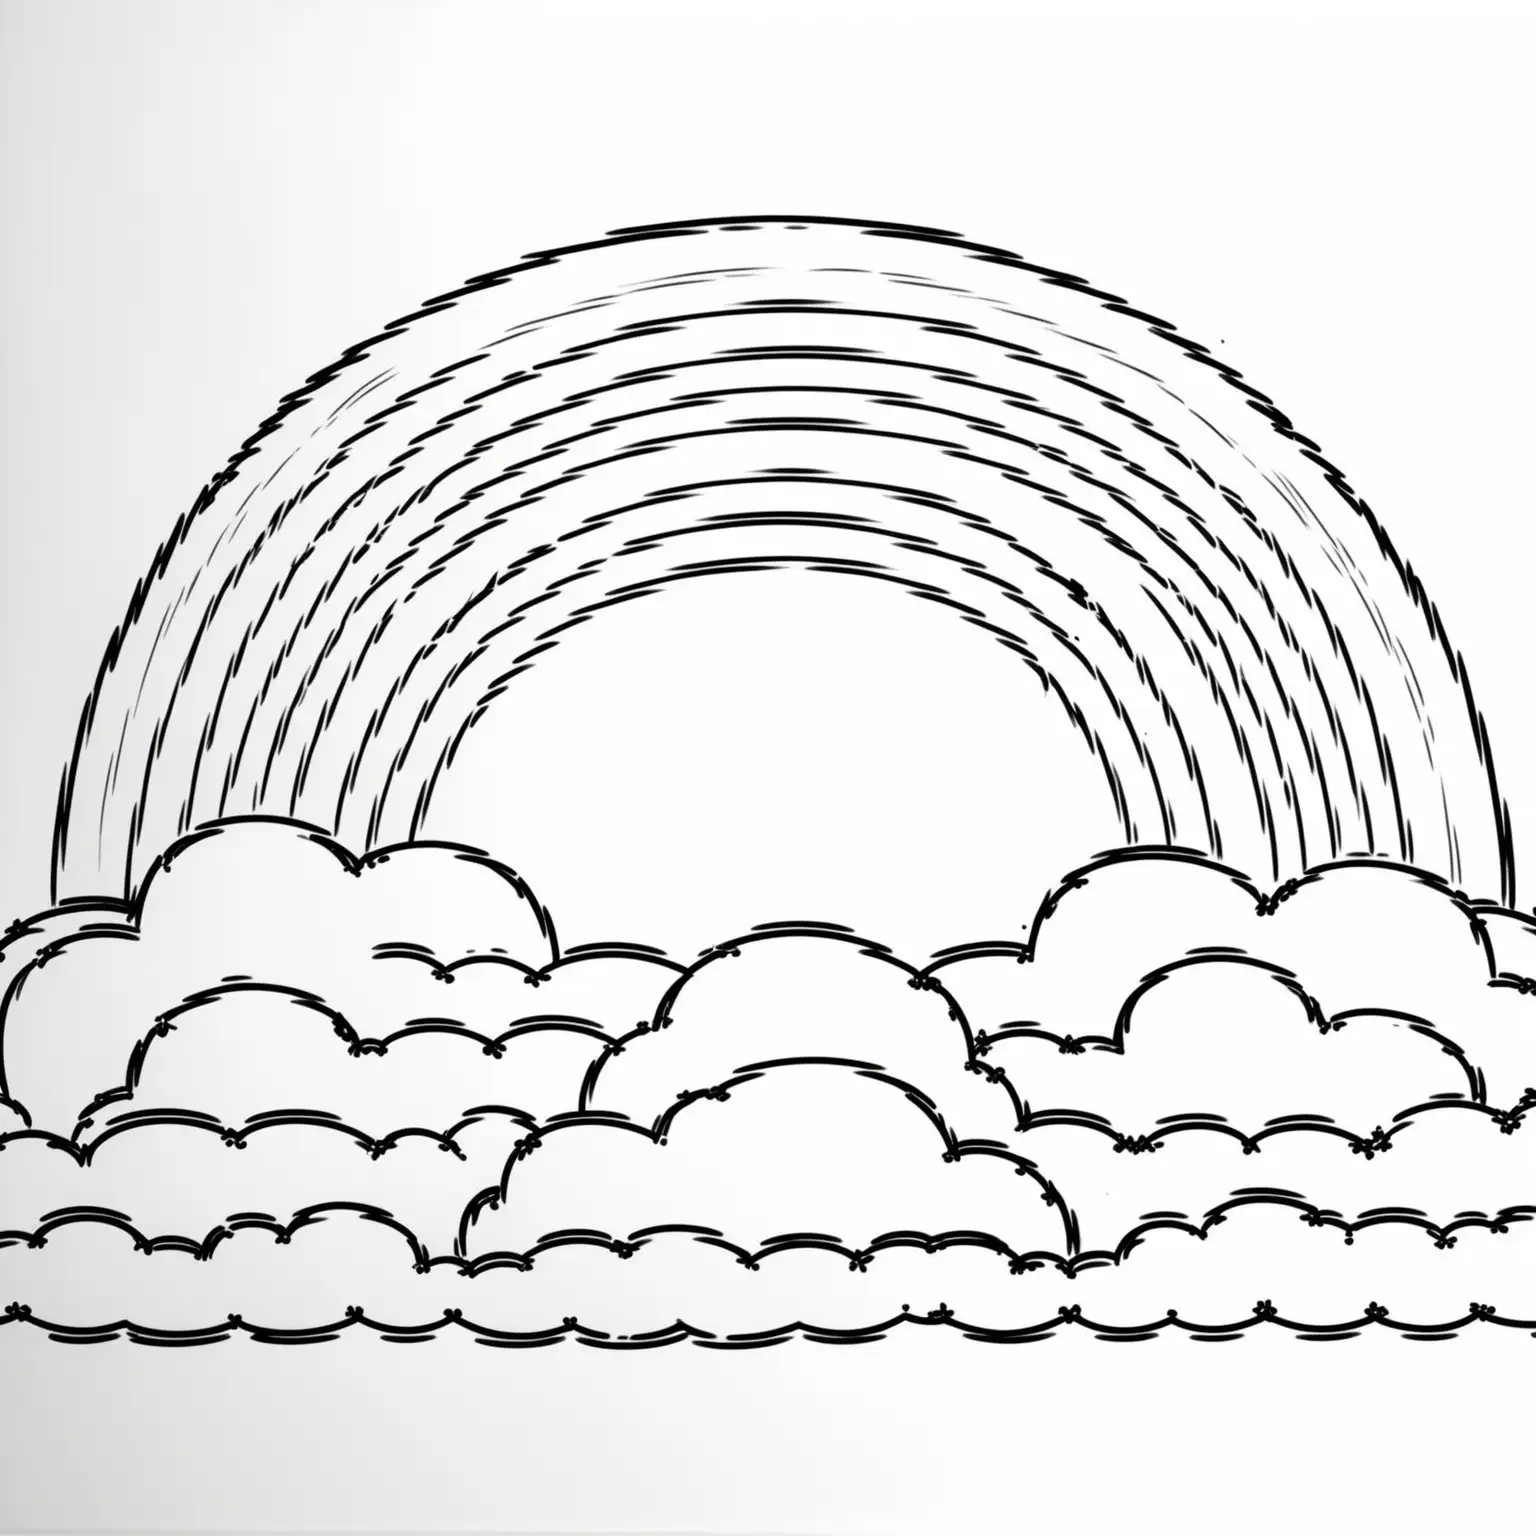 Monochrome Rainbow Coloring Page with Clouds